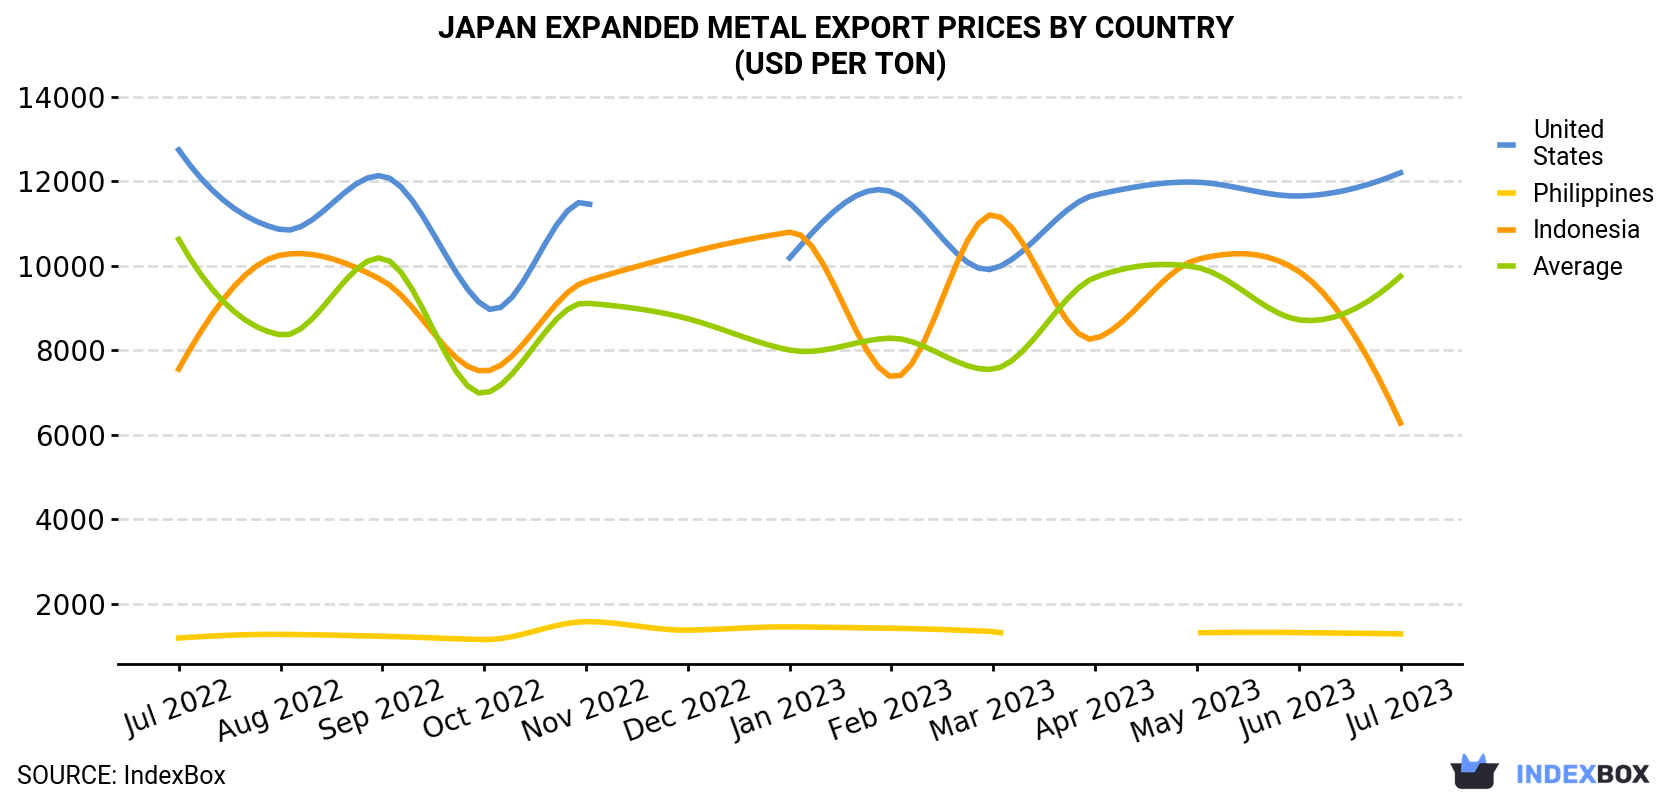 Japan Expanded Metal Export Prices By Country (USD Per Ton)